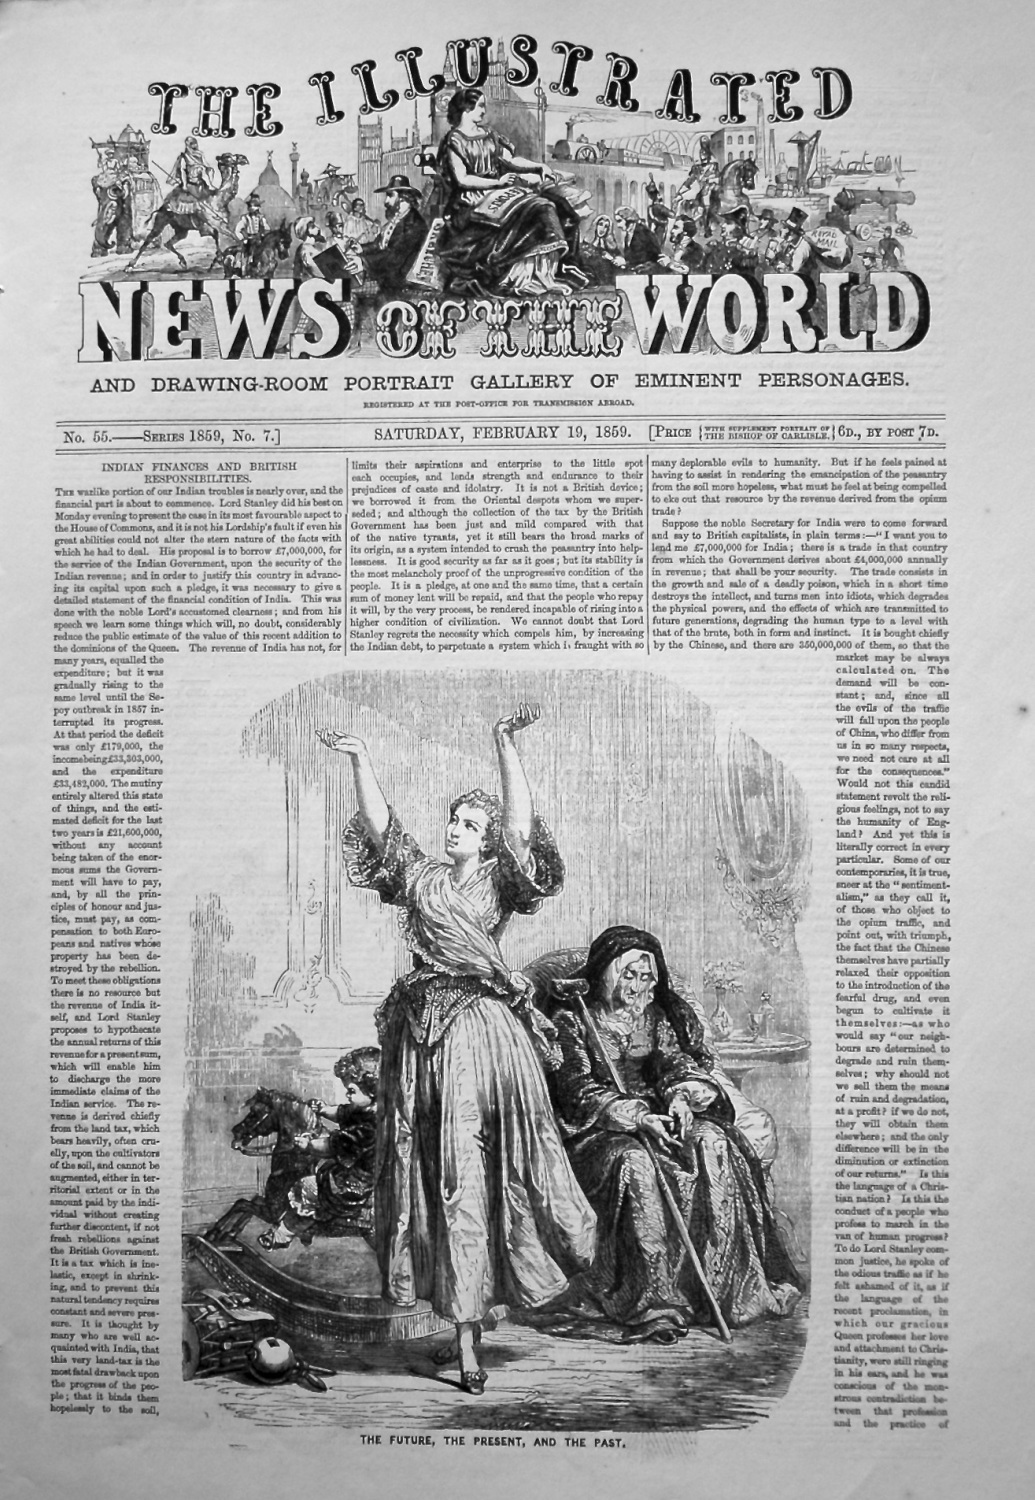 The Illustrated News of the World, February 19th, 1859.